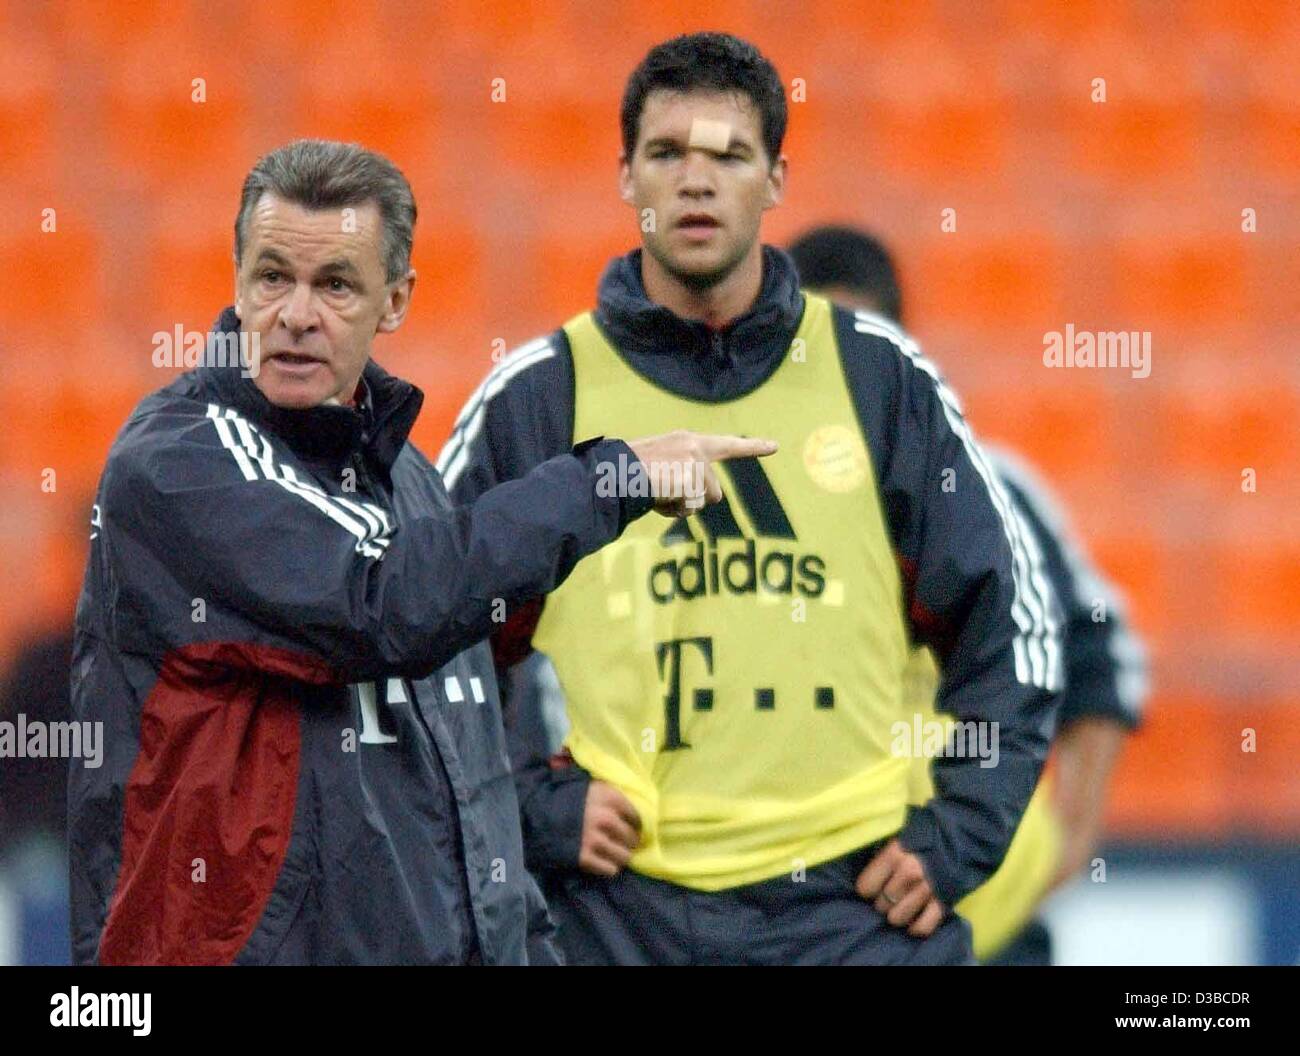 (dpa) - Bayern's soccer coach Ottmar Hitzfeld (L) directs his players during a training in Milan, Italy, 22 October 2002. On the right midfielder Michael Ballack. On 23 October the German club FC Bayern Muenchen faced AC Milan in a UEFA Champions League match. Milan won 2:1. Stock Photo